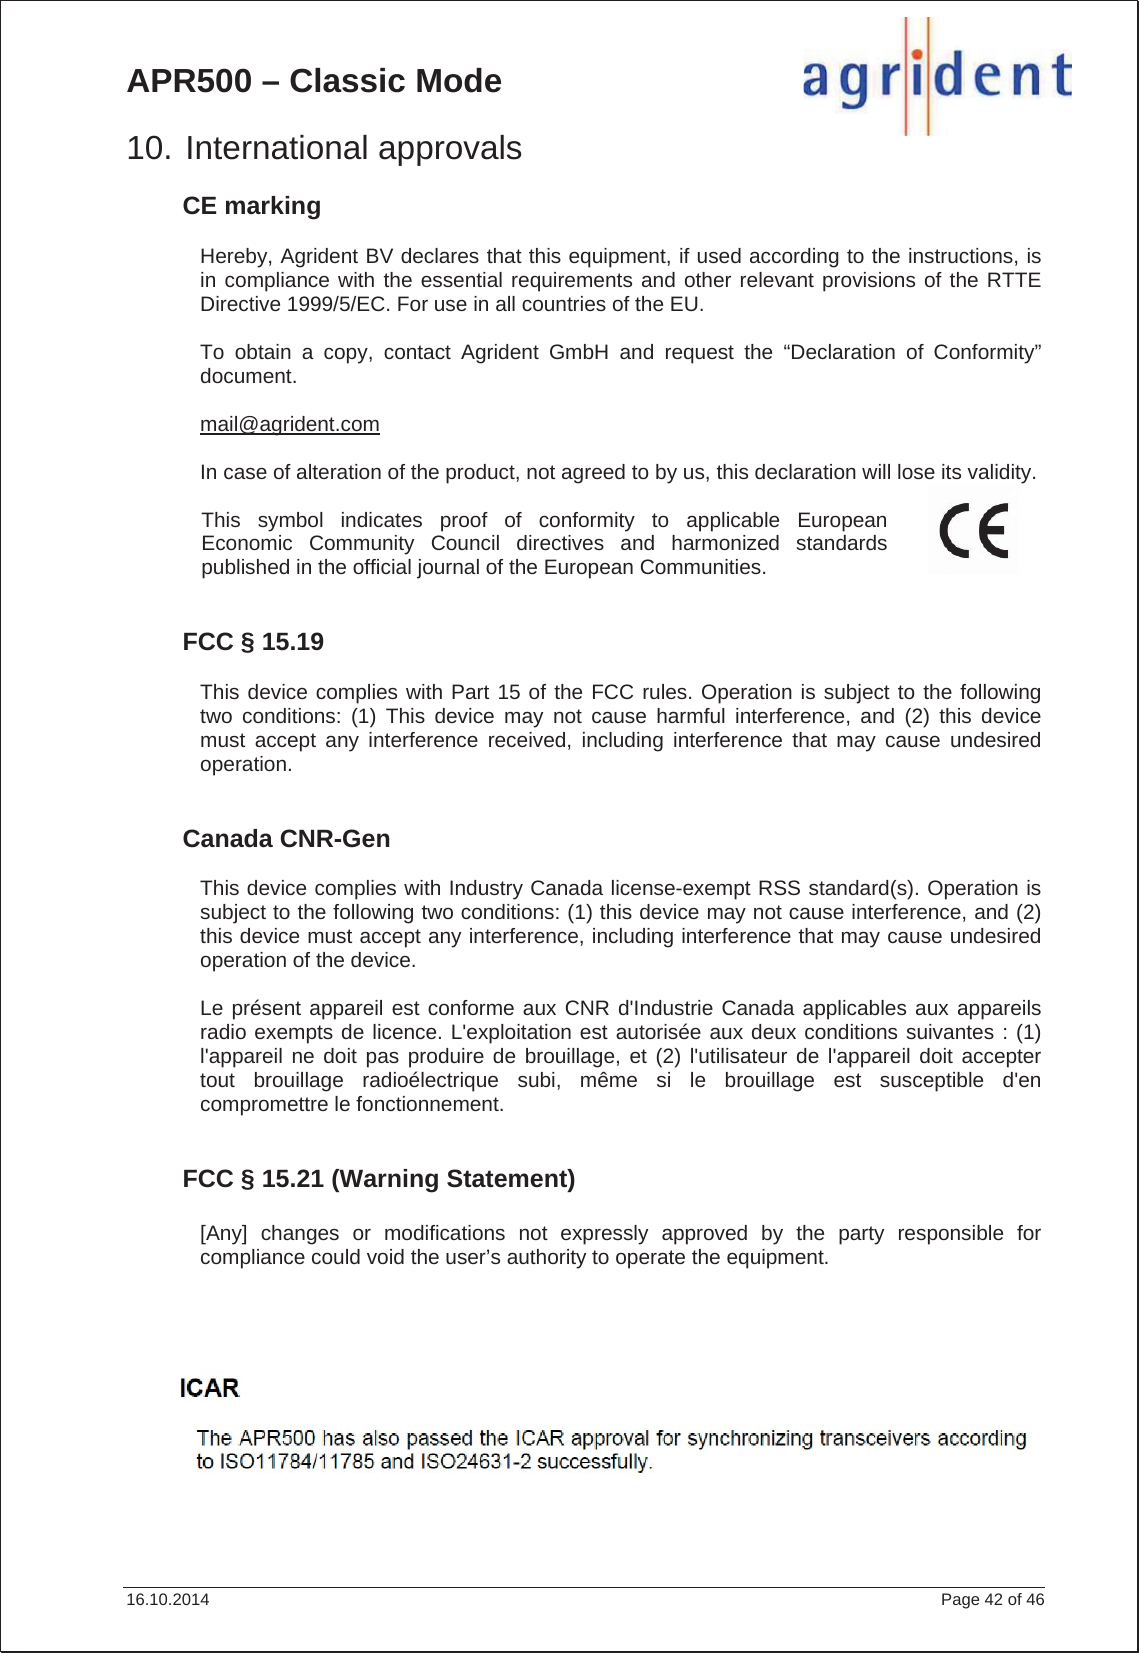 APR500 – Classic Mode 16.10.2014    Page 42 of 46 10. International approvals CE marking Hereby, Agrident BV declares that this equipment, if used according to the instructions, is in compliance with the essential requirements and other relevant provisions of the RTTE Directive 1999/5/EC. For use in all countries of the EU. To obtain a copy, contact Agrident GmbH and request the “Declaration of Conformity” document. mail@agrident.comIn case of alteration of the product, not agreed to by us, this declaration will lose its validity. This symbol indicates proof of conformity to applicable European Economic Community Council directives and harmonized standards published in the official journal of the European Communities. FCC § 15.19 This device complies with Part 15 of the FCC rules. Operation is subject to the following two conditions: (1) This device may not cause harmful interference, and (2) this device must accept any interference received, including interference that may cause undesired operation. Canada CNR-Gen Section 7.1.3 This device complies with Industry Canada license-exempt RSS standard(s). Operation is subject to the following two conditions: (1) this device may not cause interference, and (2) this device must accept any interference, including interference that may cause undesired operation of the device. Le présent appareil est conforme aux CNR d&apos;Industrie Canada applicables aux appareils radio exempts de licence. L&apos;exploitation est autorisée aux deux conditions suivantes : (1) l&apos;appareil ne doit pas produire de brouillage, et (2) l&apos;utilisateur de l&apos;appareil doit accepter tout brouillage radioélectrique subi, même si le brouillage est susceptible d&apos;en compromettre le fonctionnement. FCC § 15.21 (Warning Statement) [Any] changes or modifications not expressly approved by the party responsible for compliance could void the user’s authority to operate the equipment. Section 7.1.3 